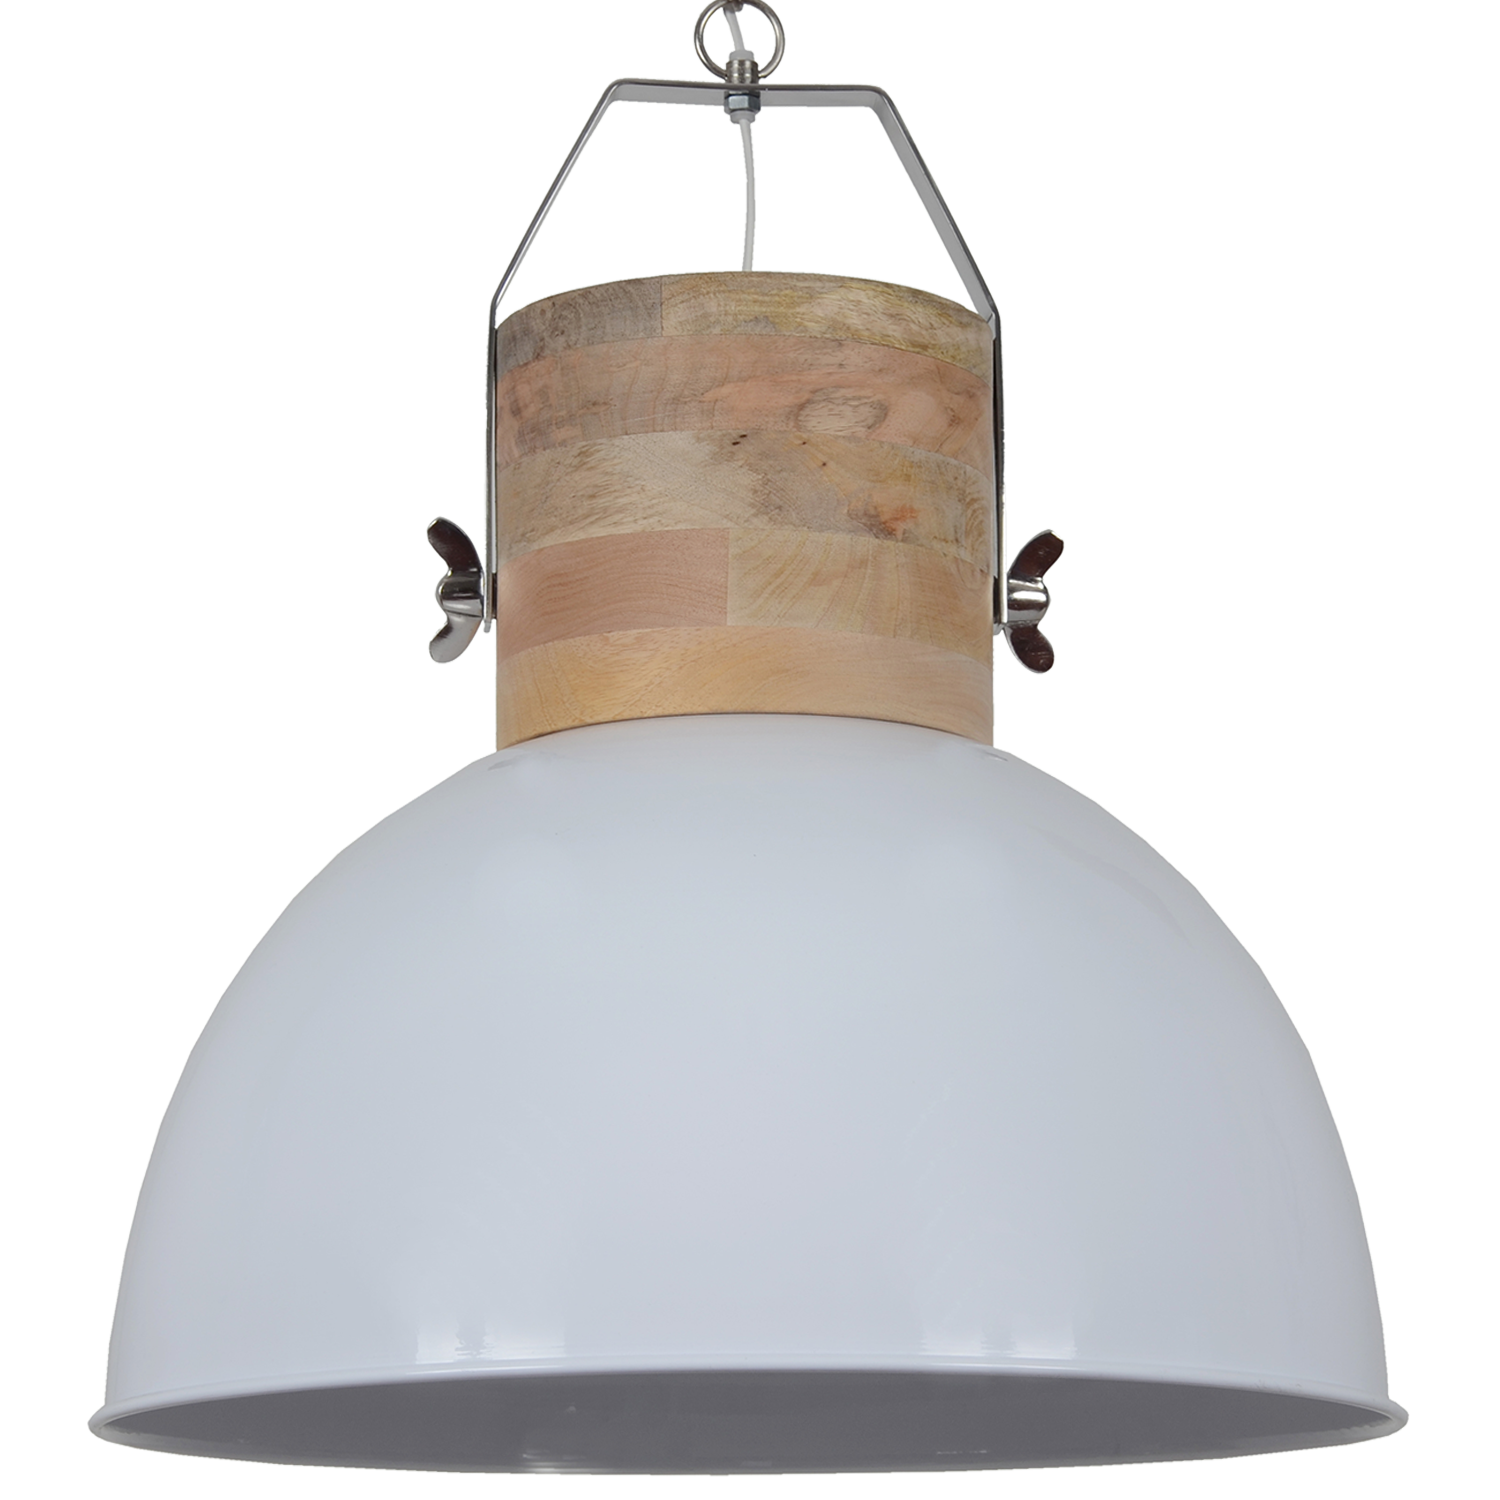 Hanglamp Fabriano 50 cm glans wit